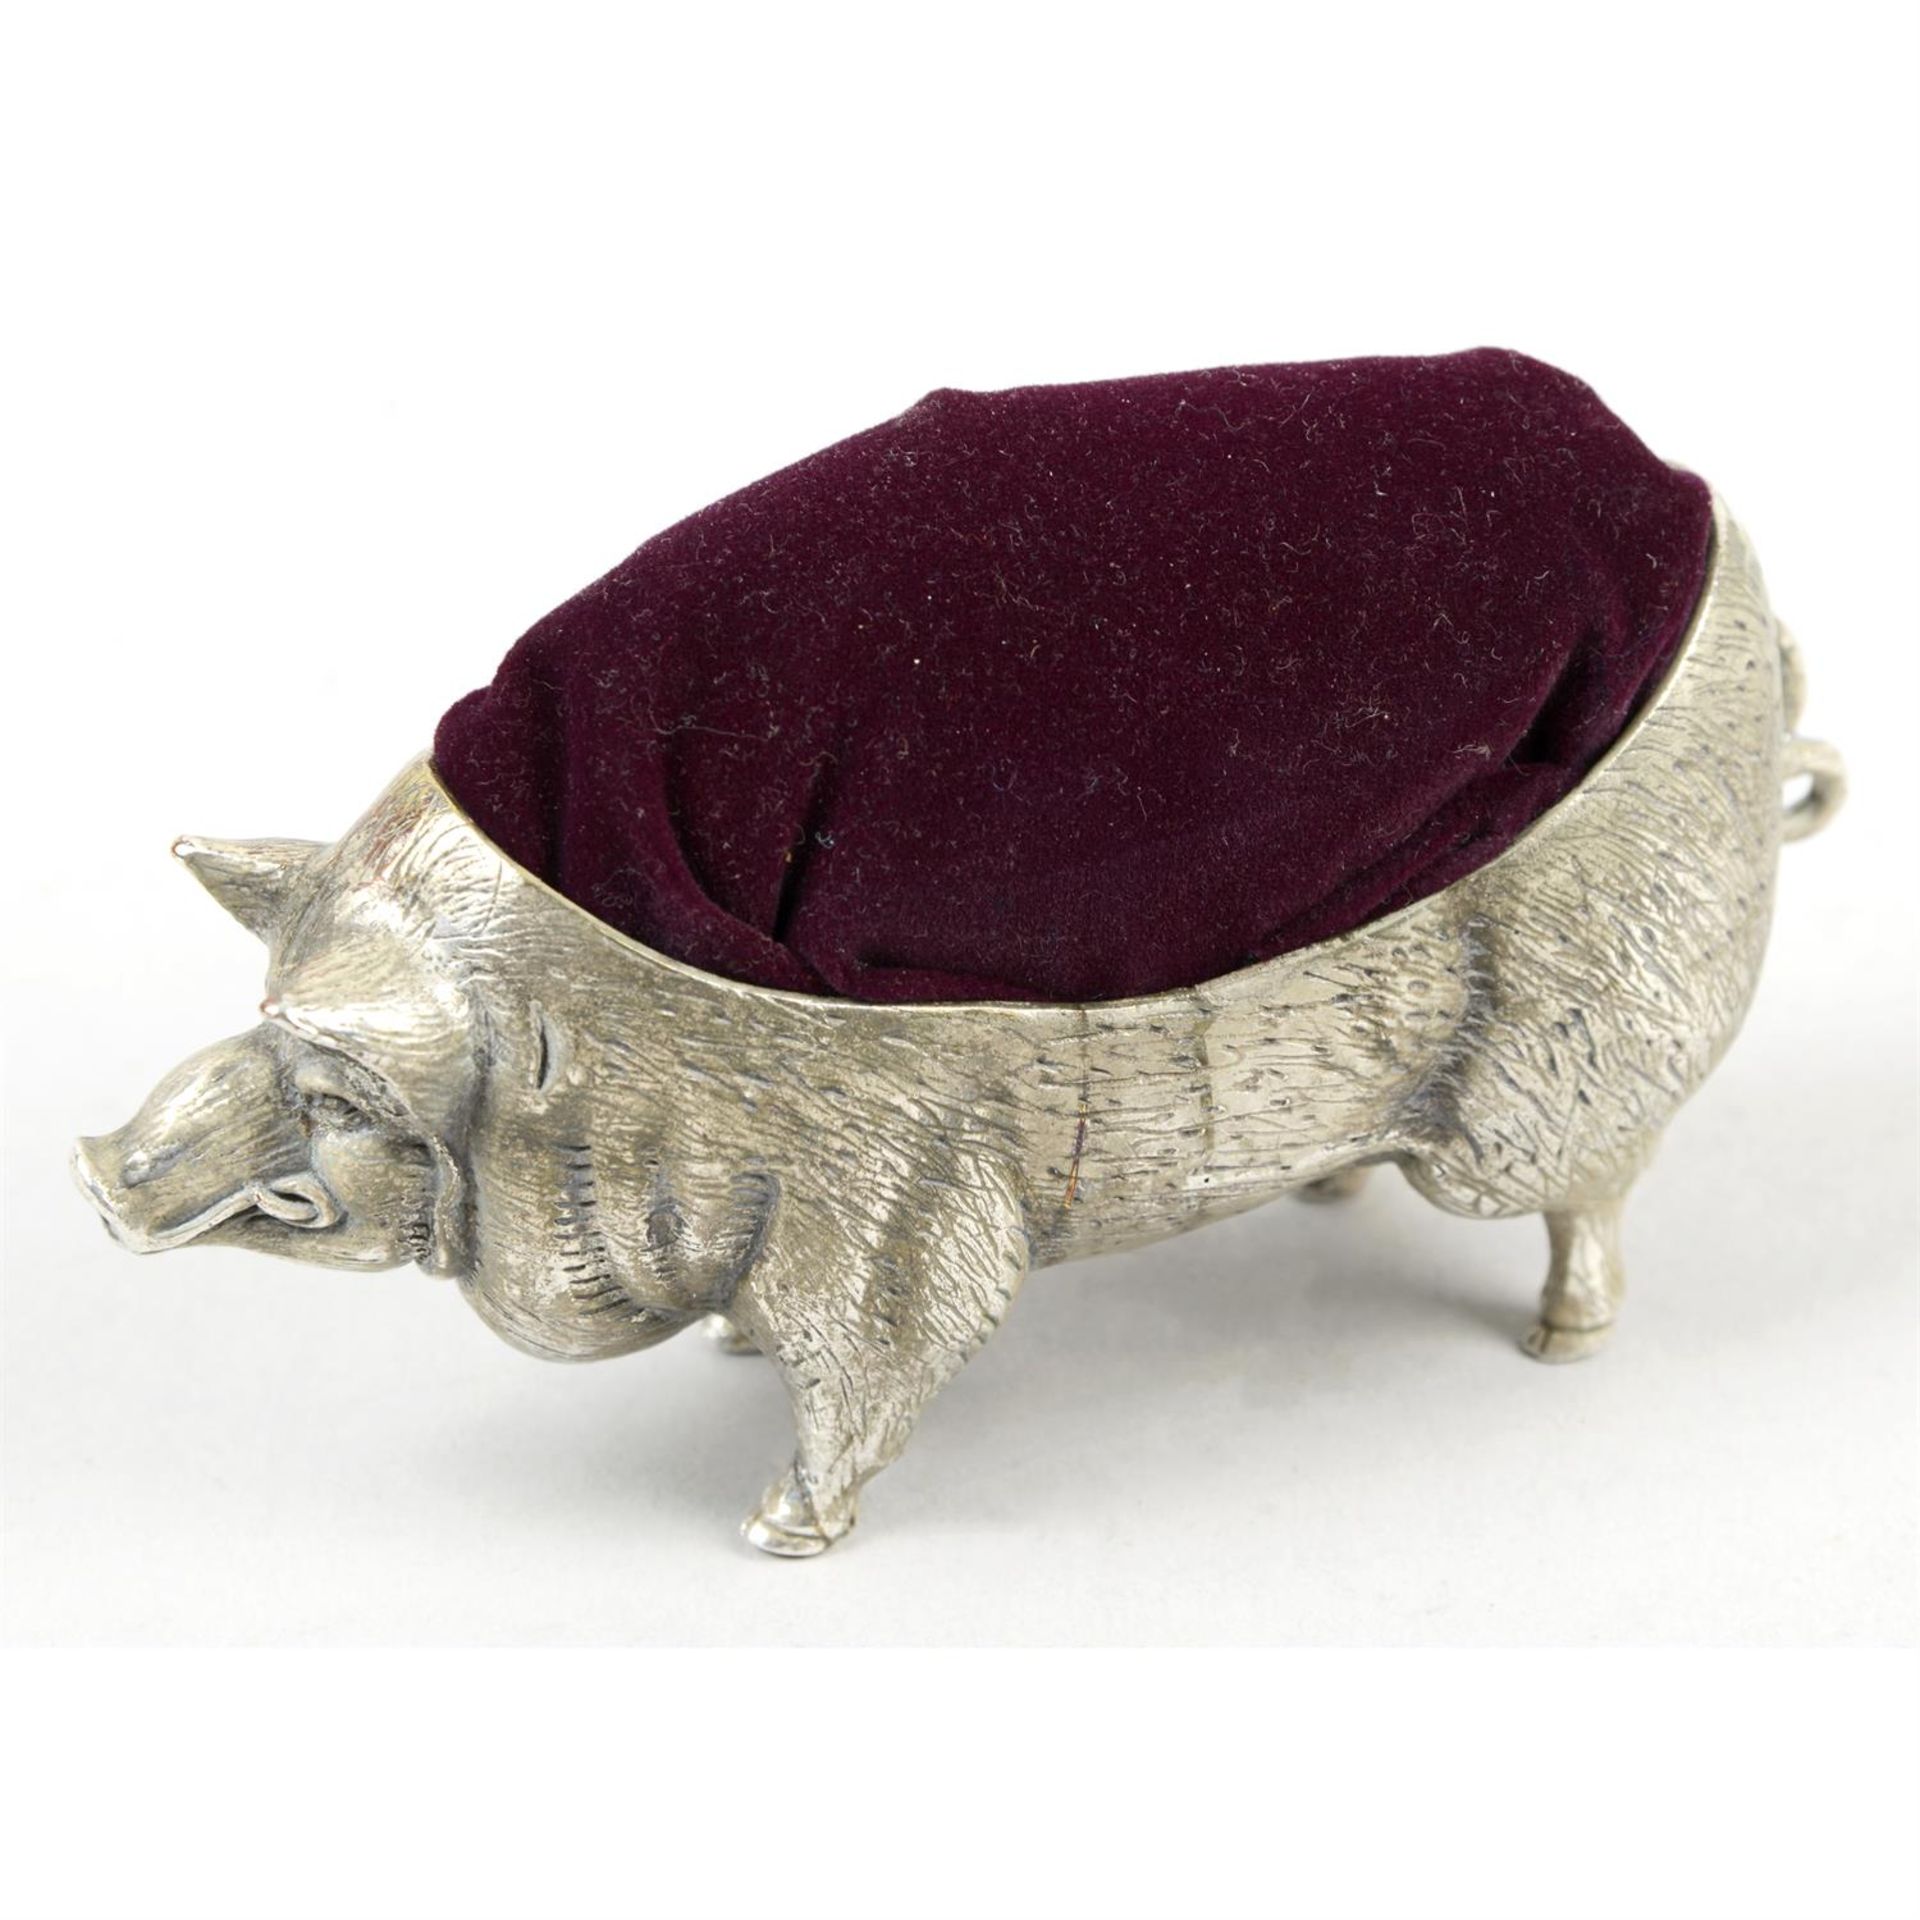 A pin cushion modelled as a pig, marked 800.